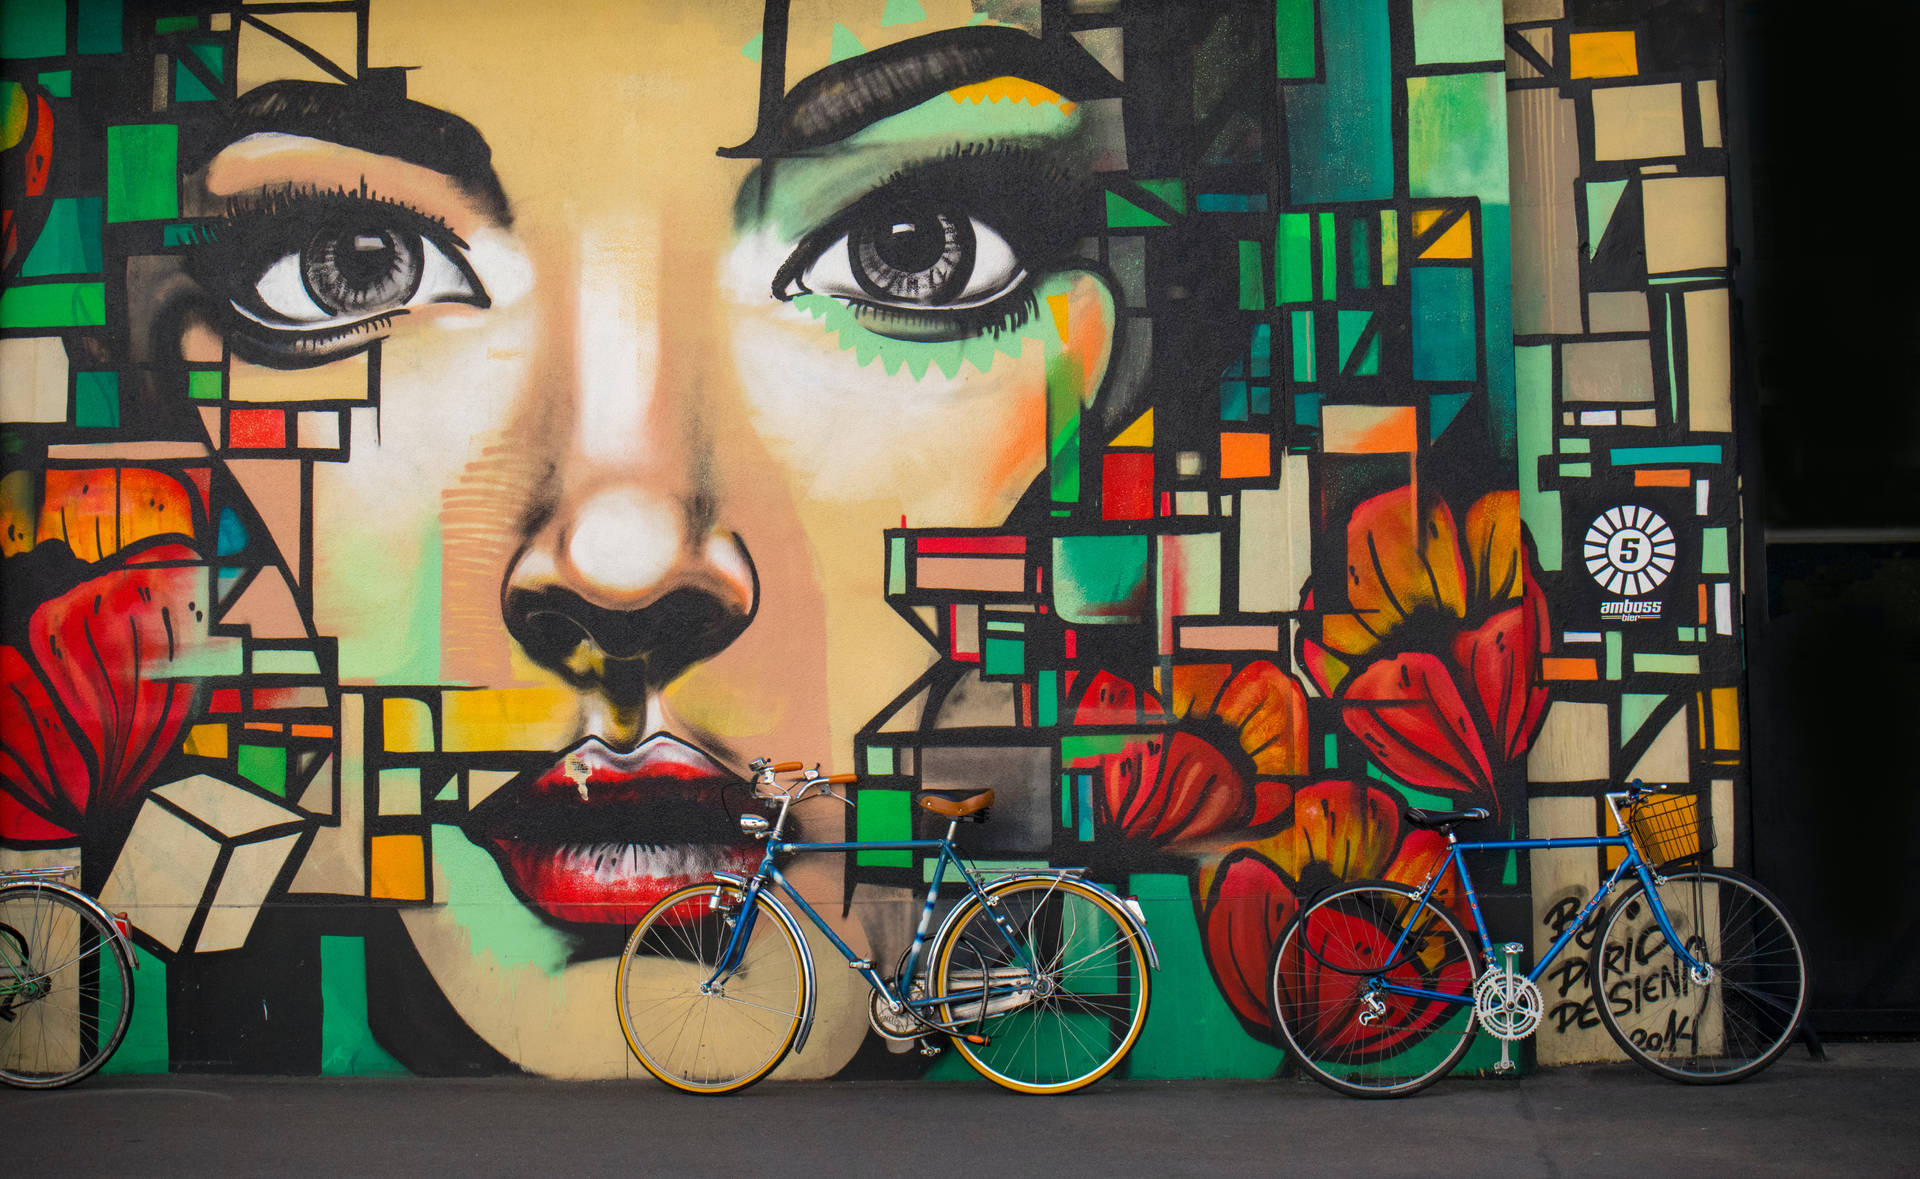 Hd Art Wall With A Parked Bicycle Wallpaper